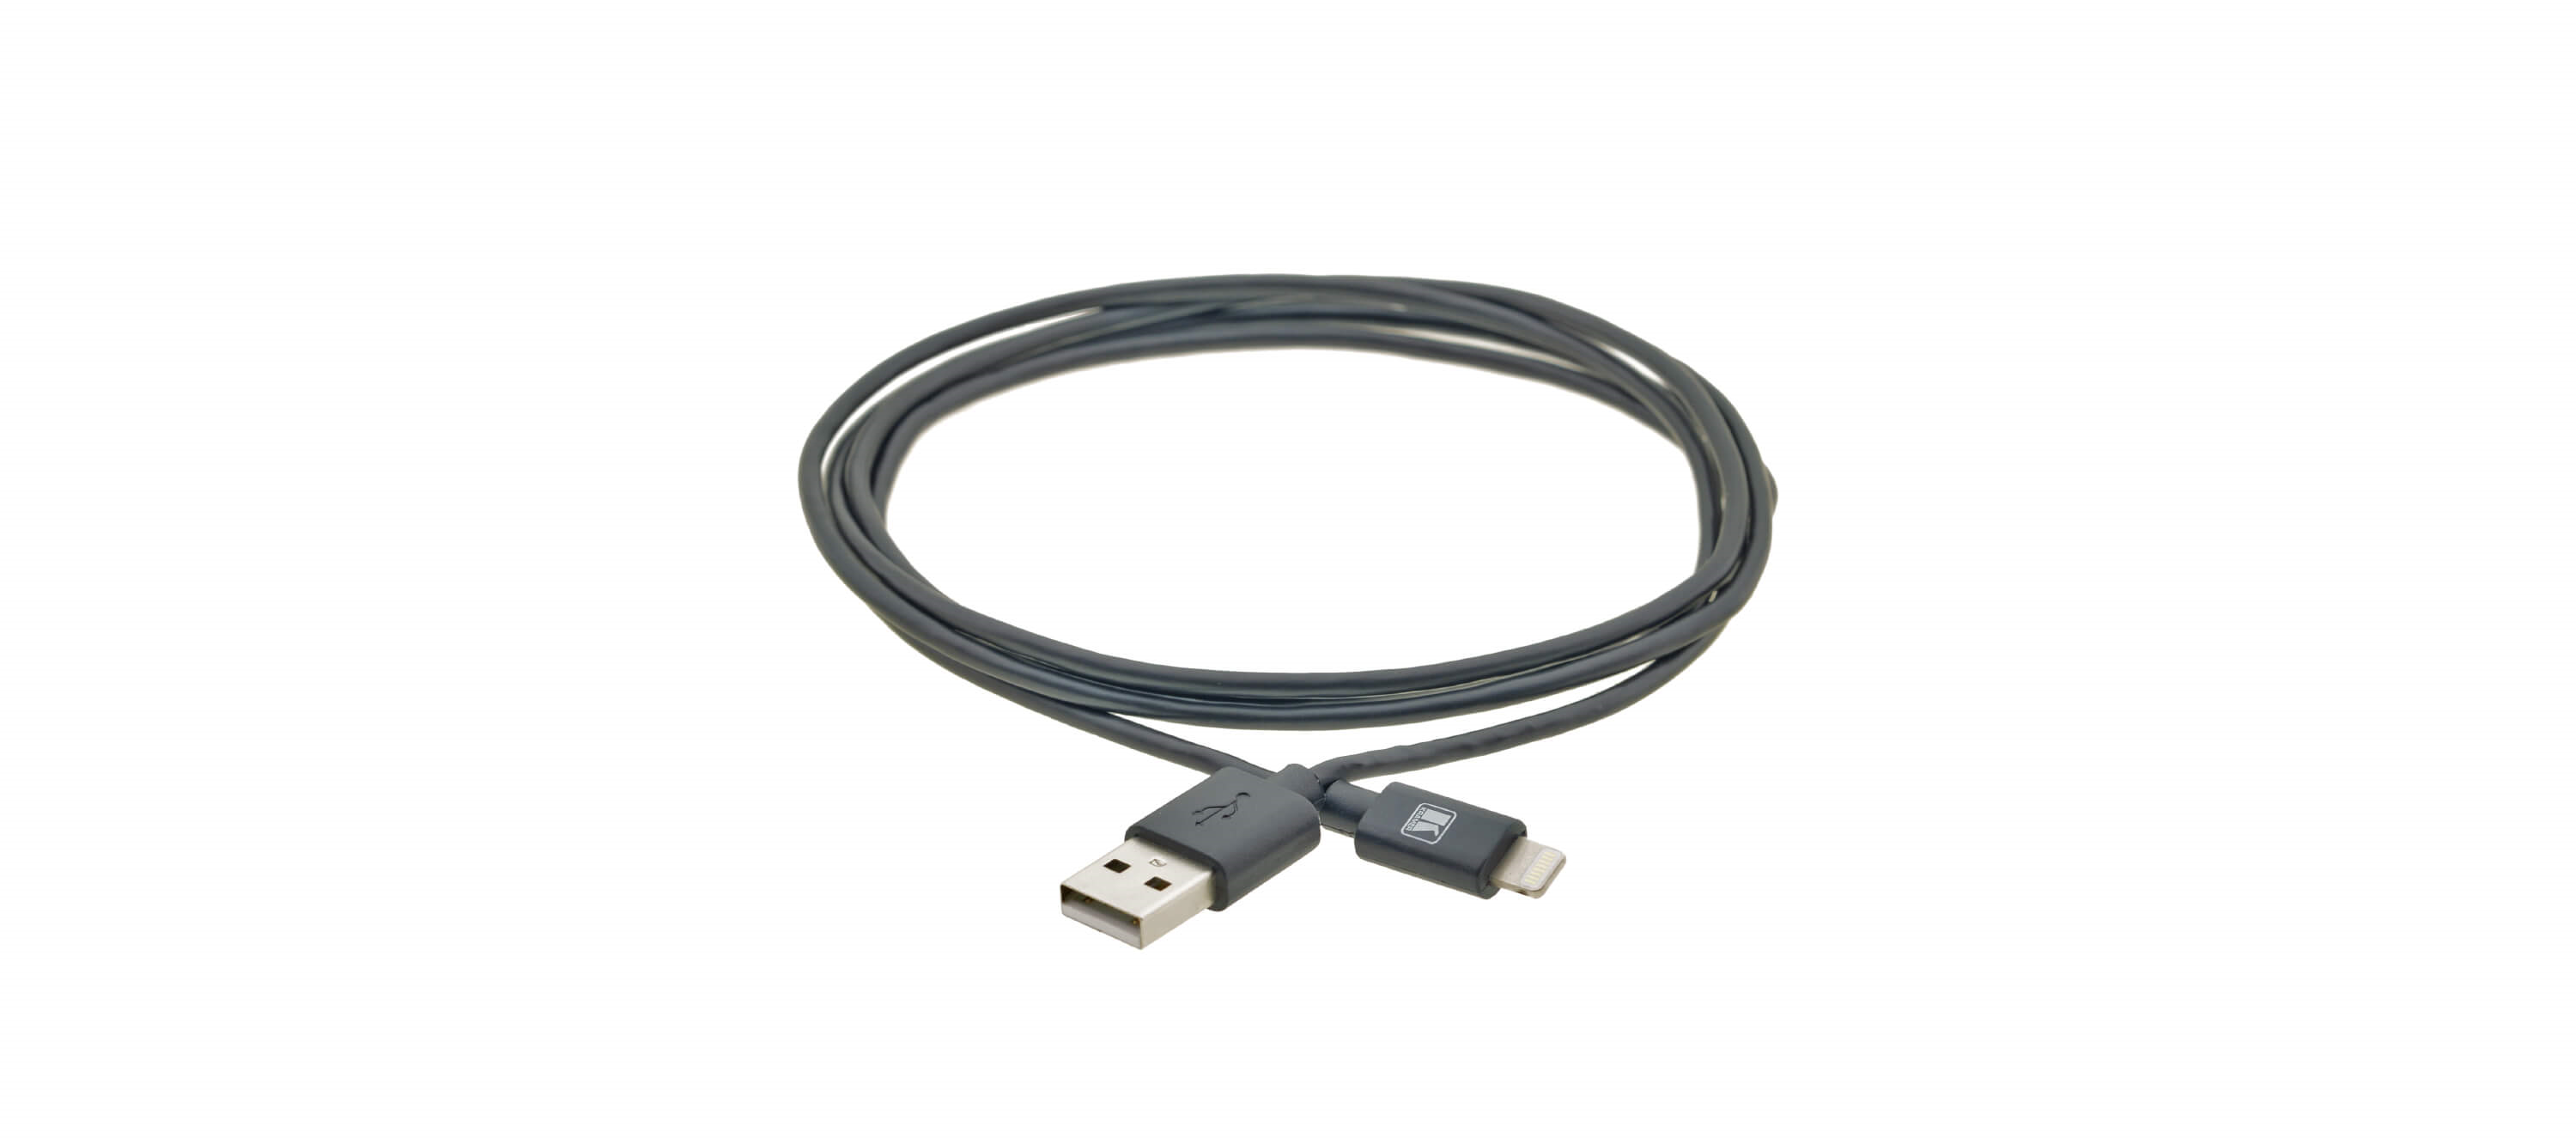 C-UA/LTN/BK-6 Apple Certified Lightning to USB Sync & Charge Cable